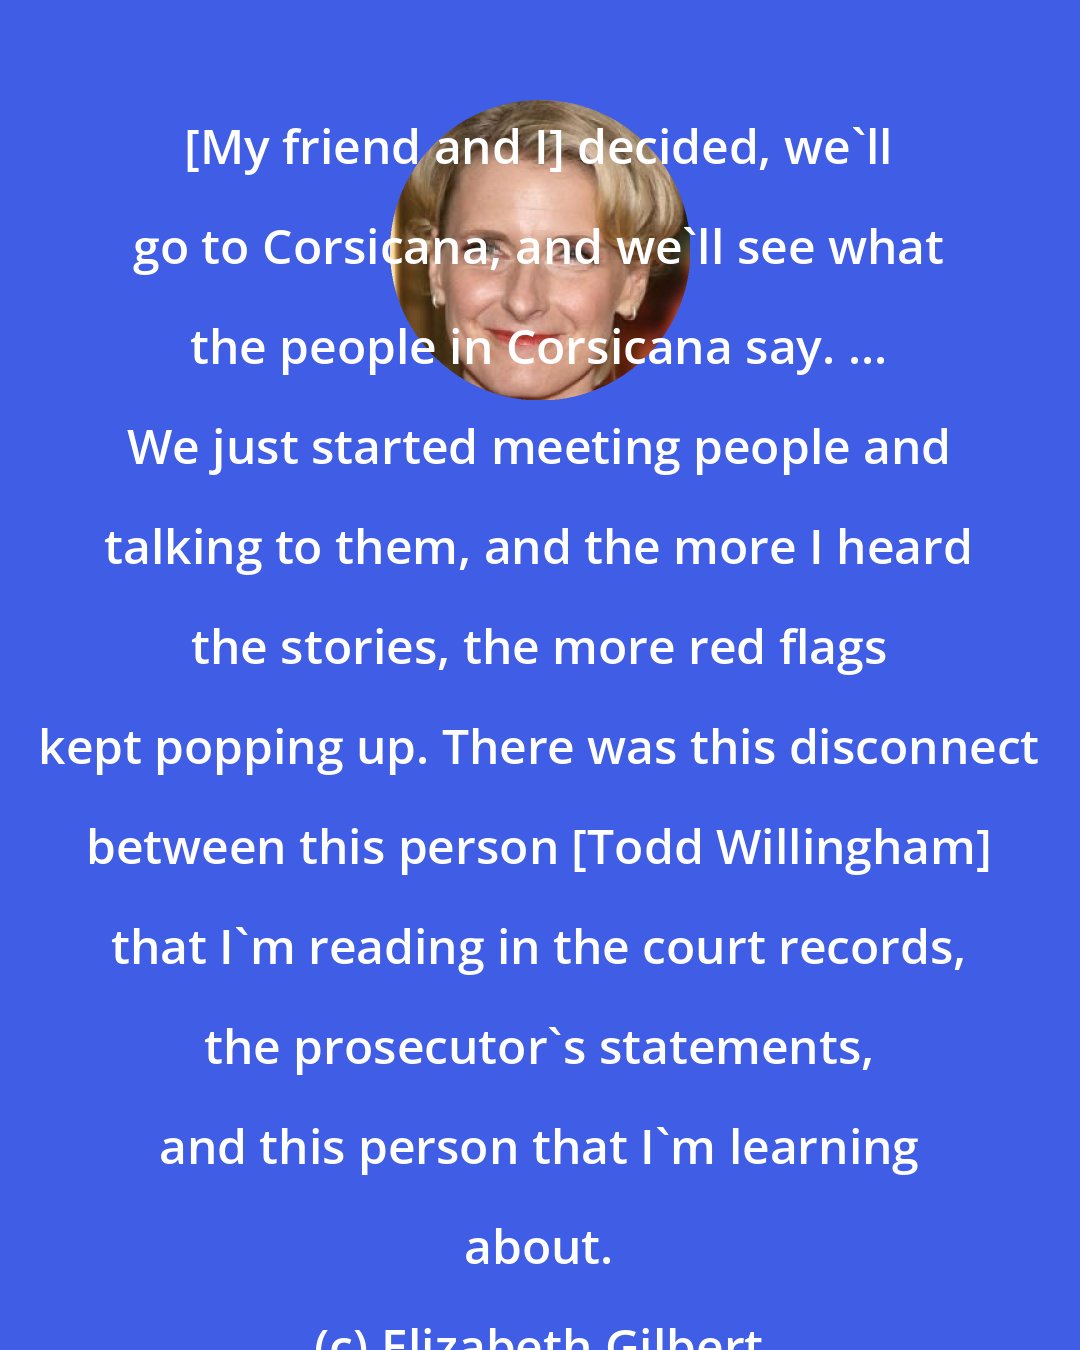 Elizabeth Gilbert: [My friend and I] decided, we'll go to Corsicana, and we'll see what the people in Corsicana say. ... We just started meeting people and talking to them, and the more I heard the stories, the more red flags kept popping up. There was this disconnect between this person [Todd Willingham] that I'm reading in the court records, the prosecutor's statements, and this person that I'm learning about.